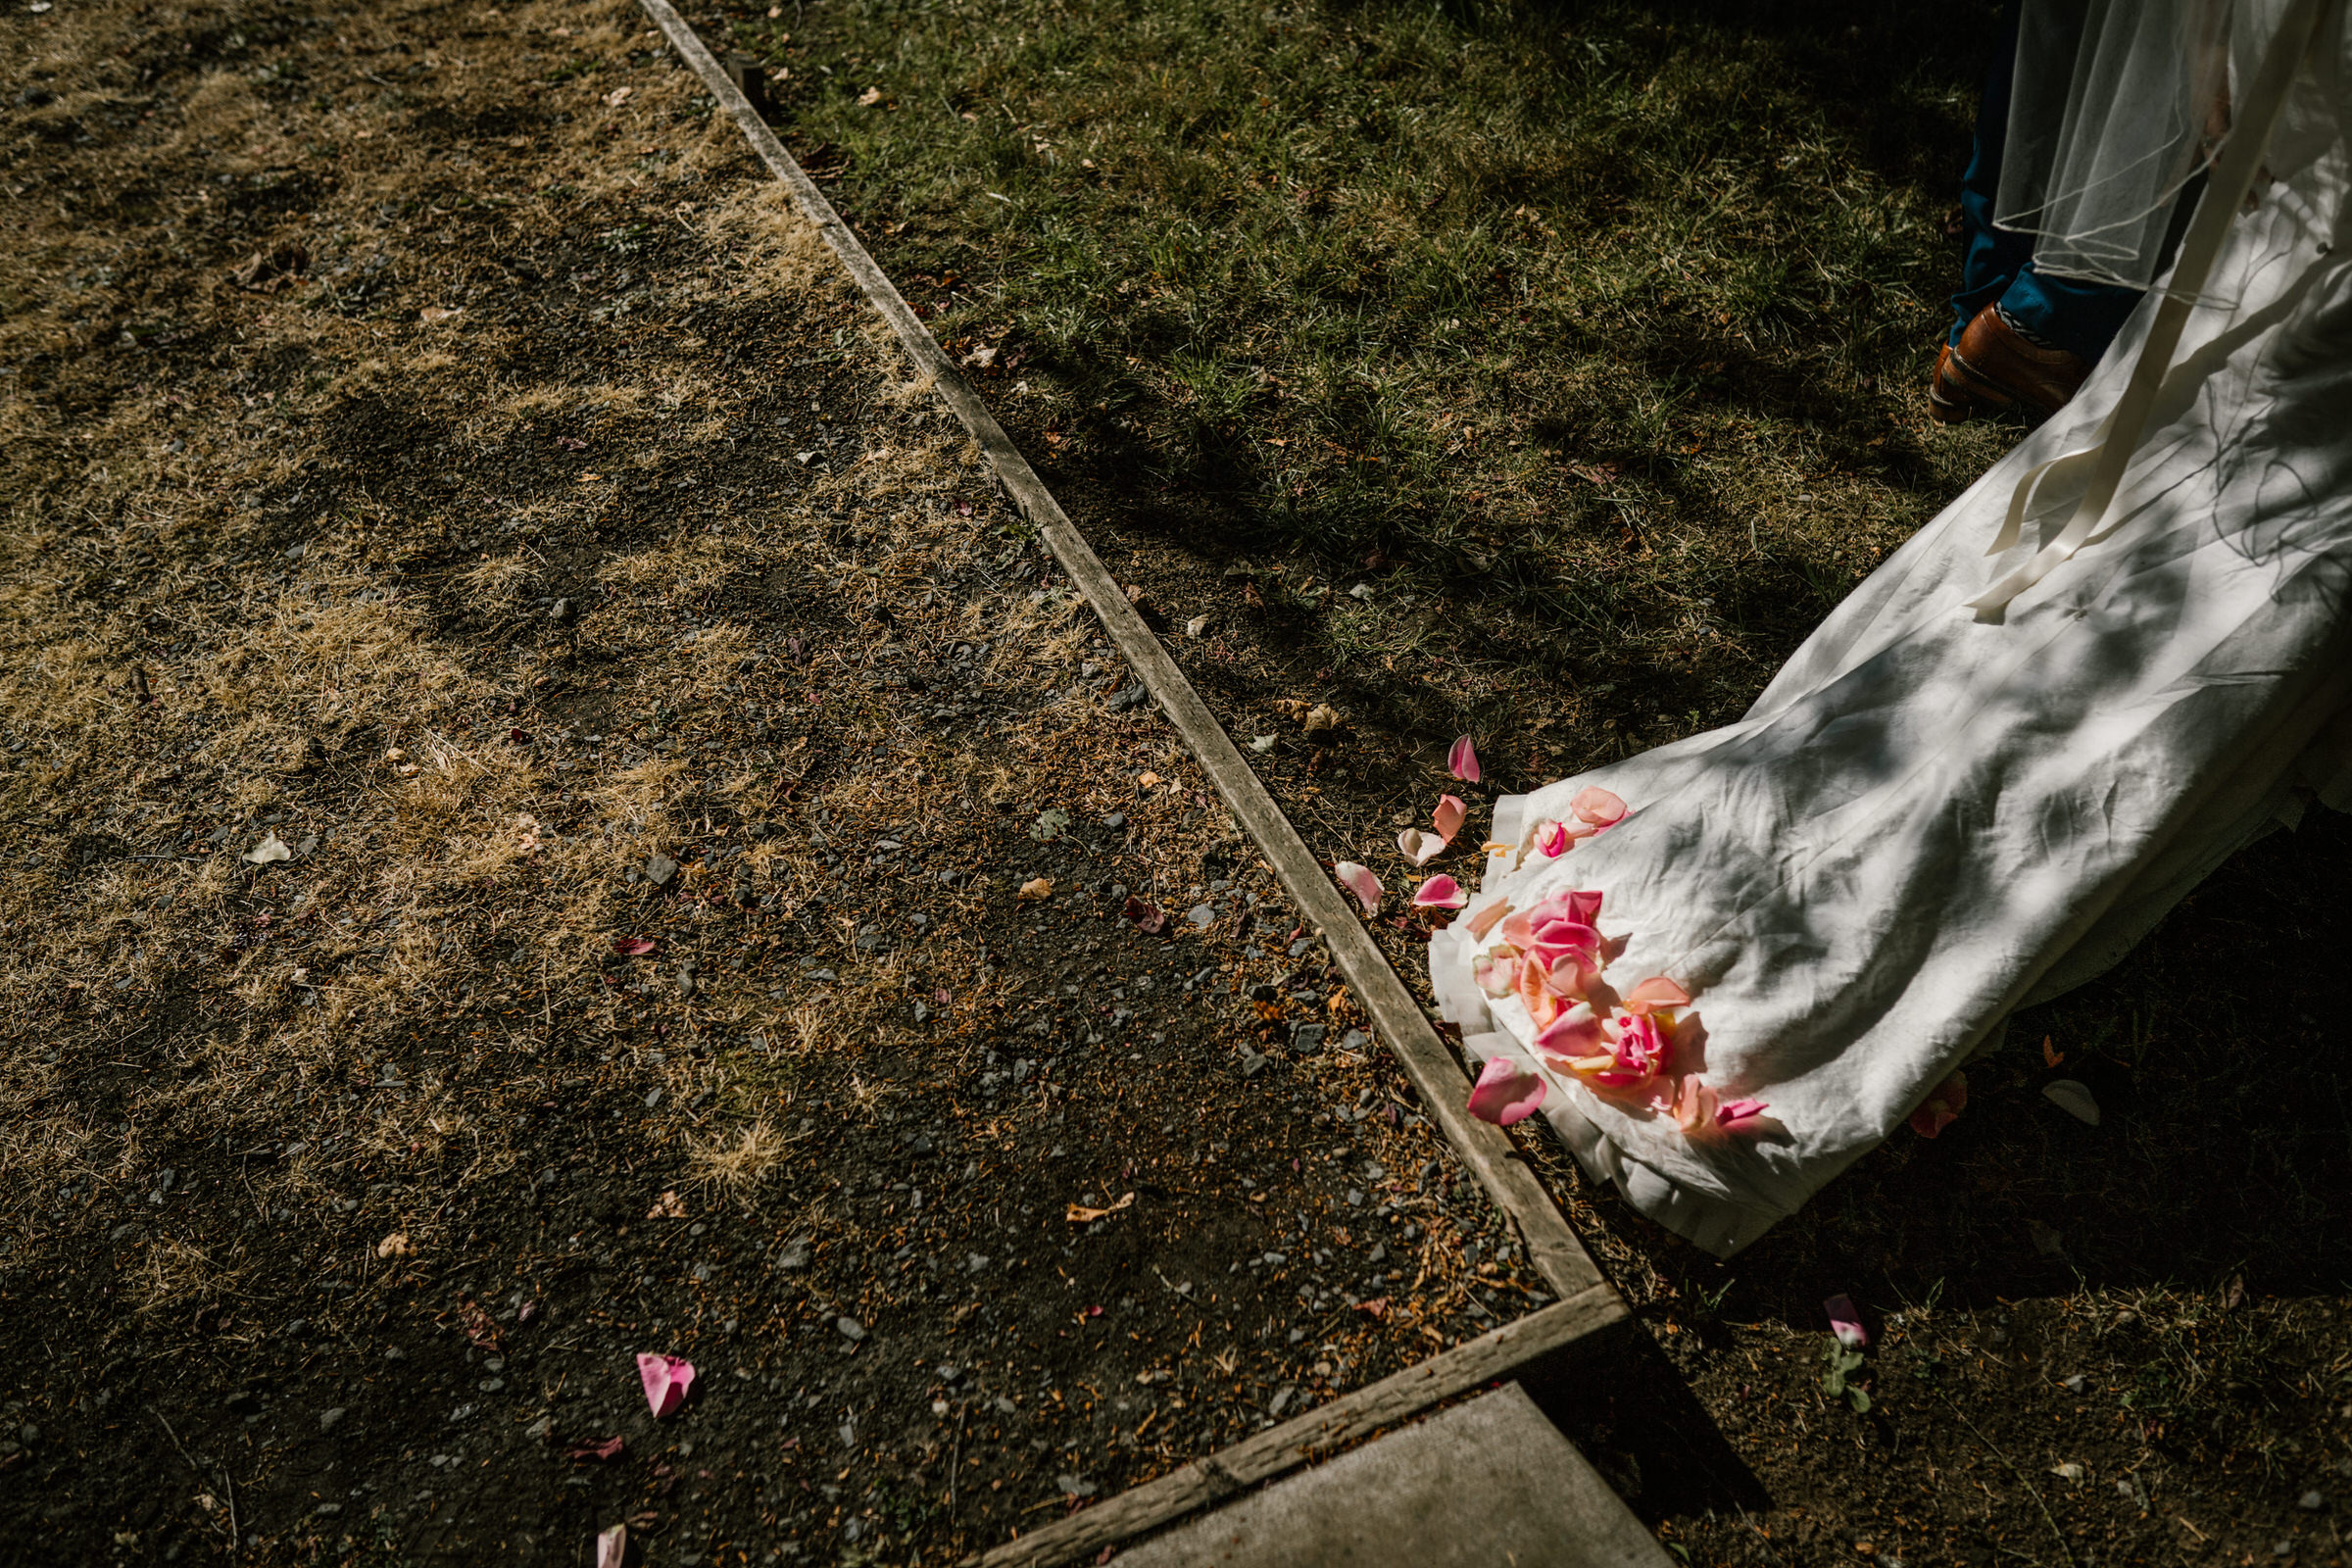 Wayfarer Whidbey Island Wedding: Rose petals on the ground and on Sara's train after the wedding ceremony